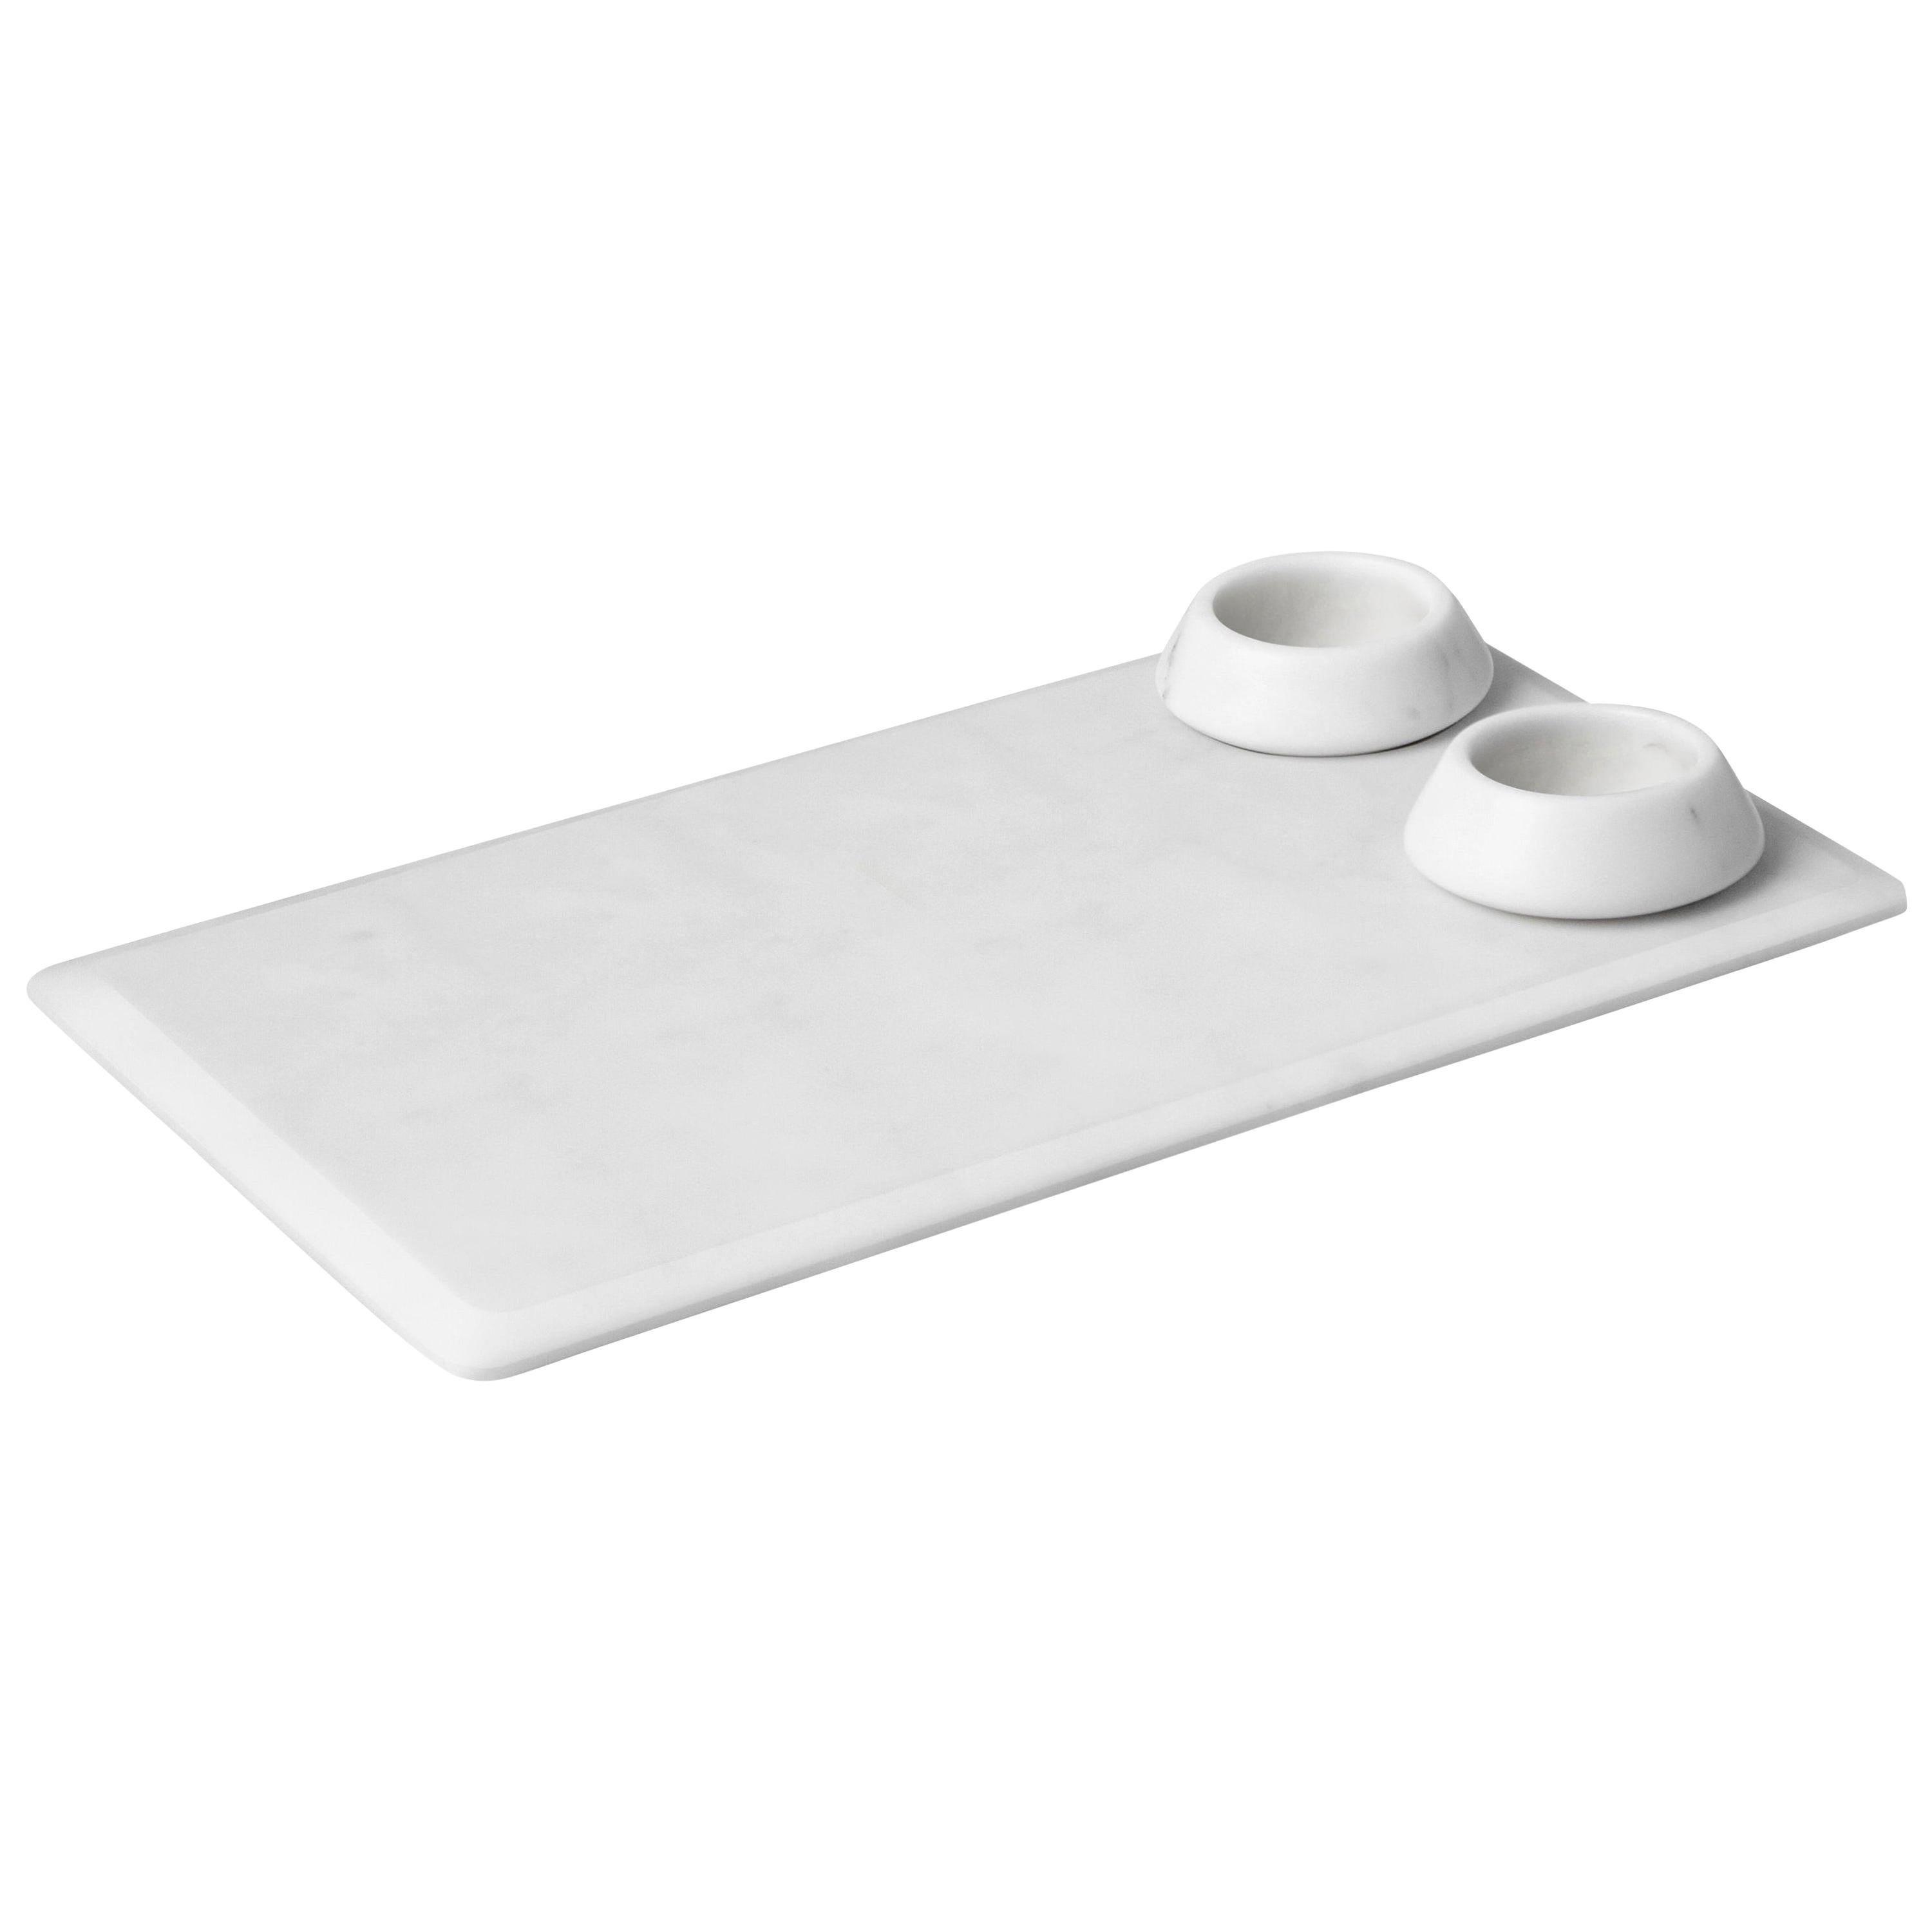 New Modern Serving Platter with Bowls in white Marble, Ivan Colominas Stock